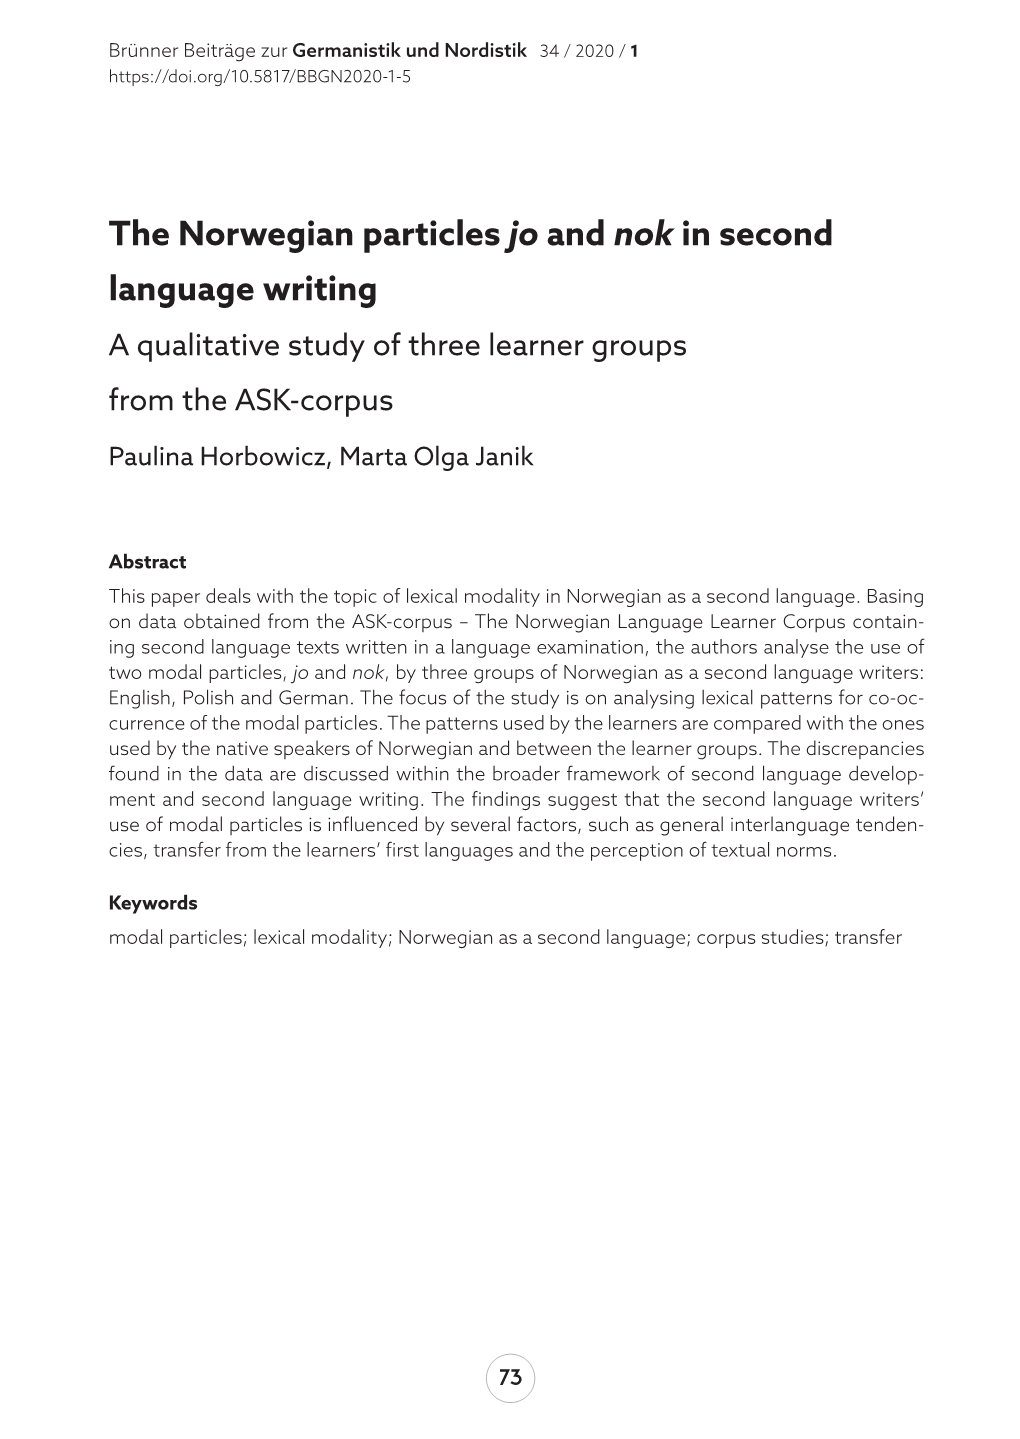 The Norwegian Particles Jo and Nok in Second Language Writing a Qualitative Study of Three Learner Groups from the ASK-Corpus